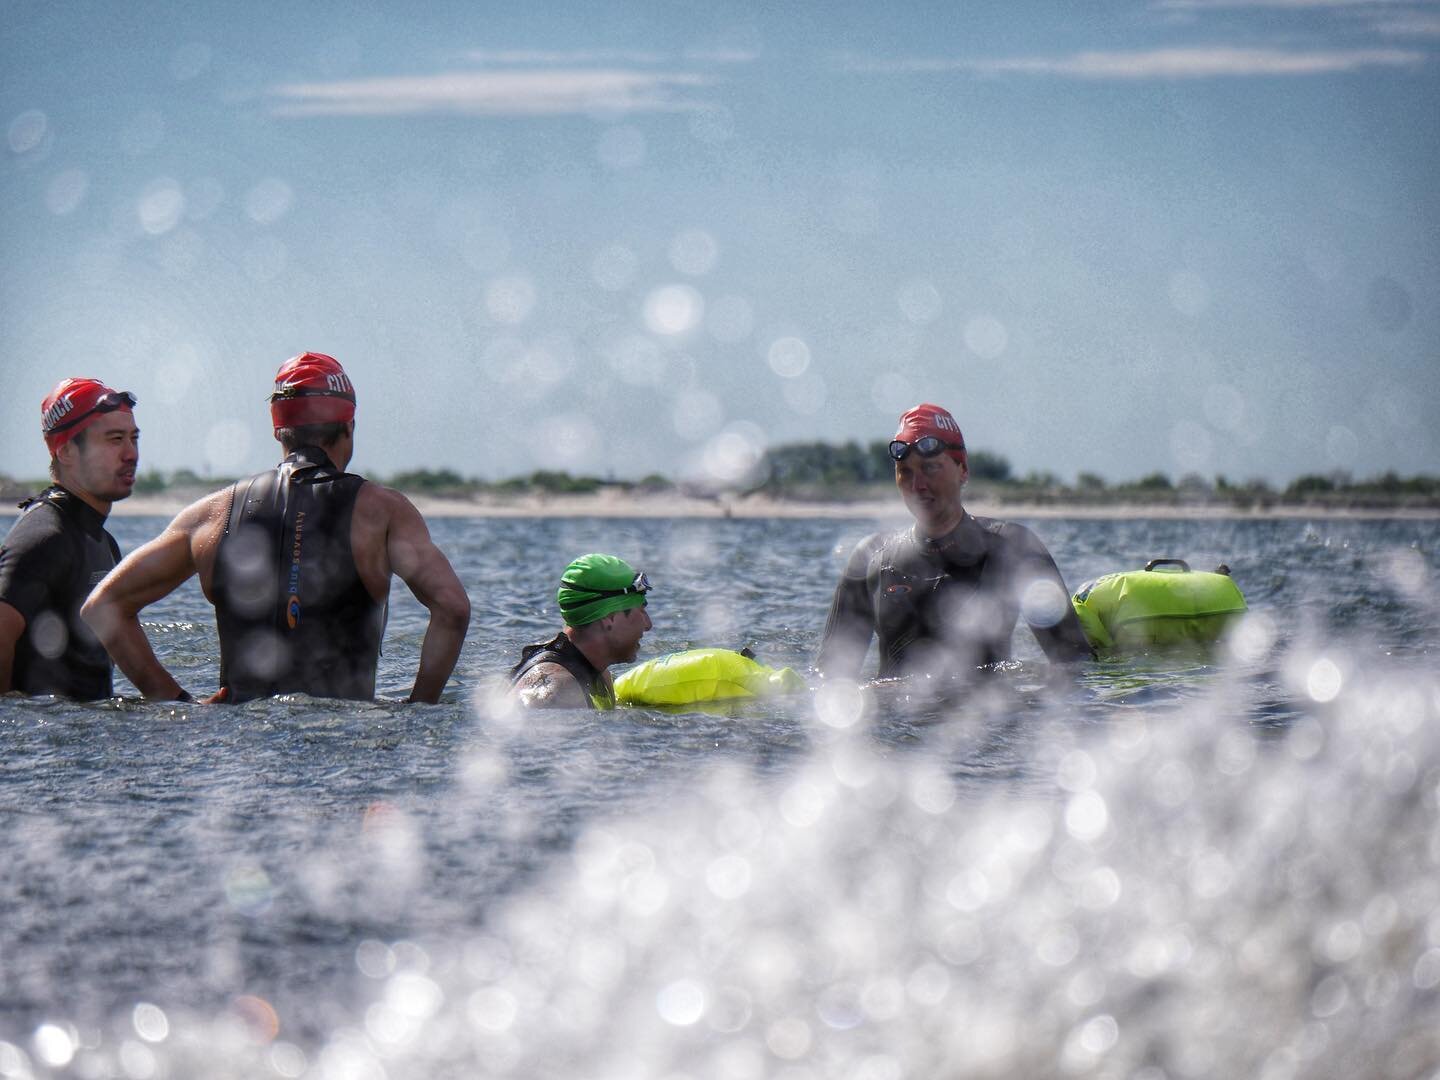 Yes, the NYC Tri is straight, fast and relatively easy w/ your wetsuit. And we all know about the legendary bag of chips that &quot;swims&quot; 30:00. That doesn't mean you don't have to take it seriously. 

Our group practice was a couple of weeks a